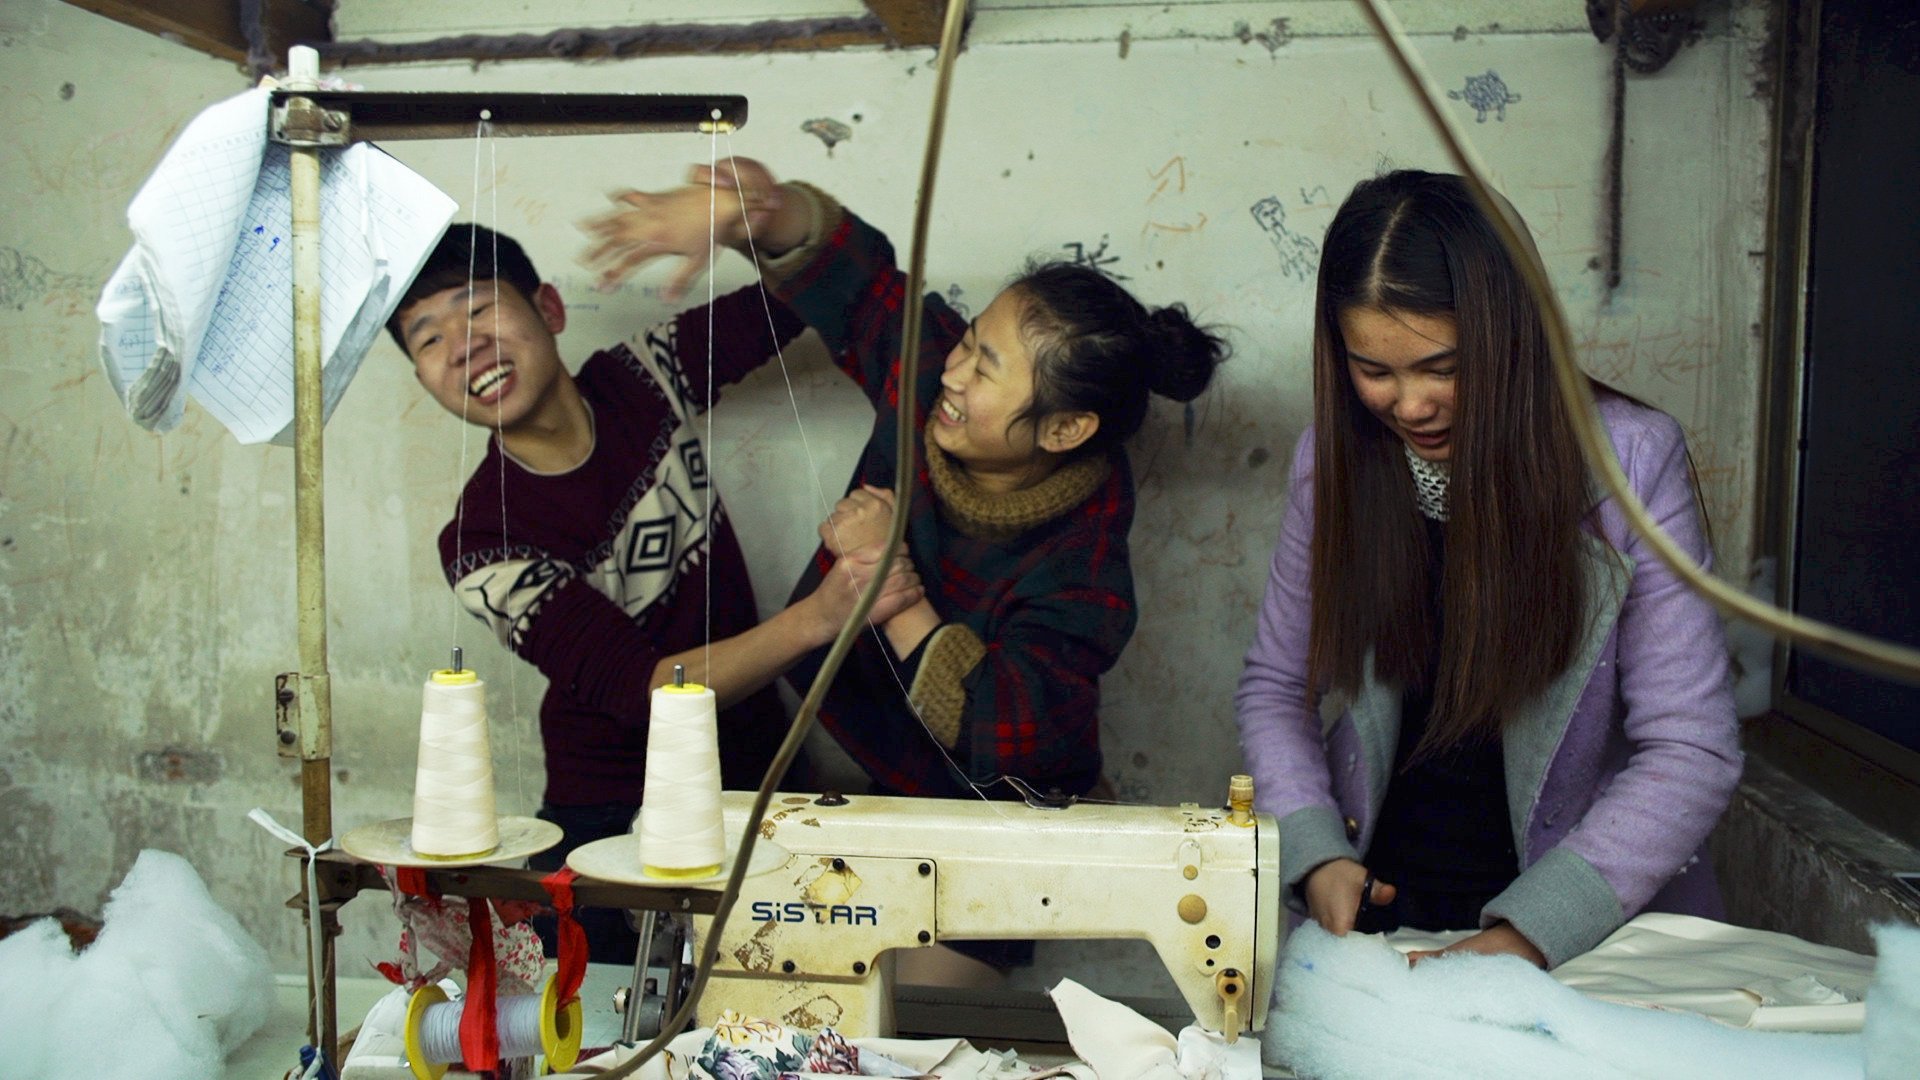 A still from “Youth (Spring)“, a documentary film directed by Wang Bing.